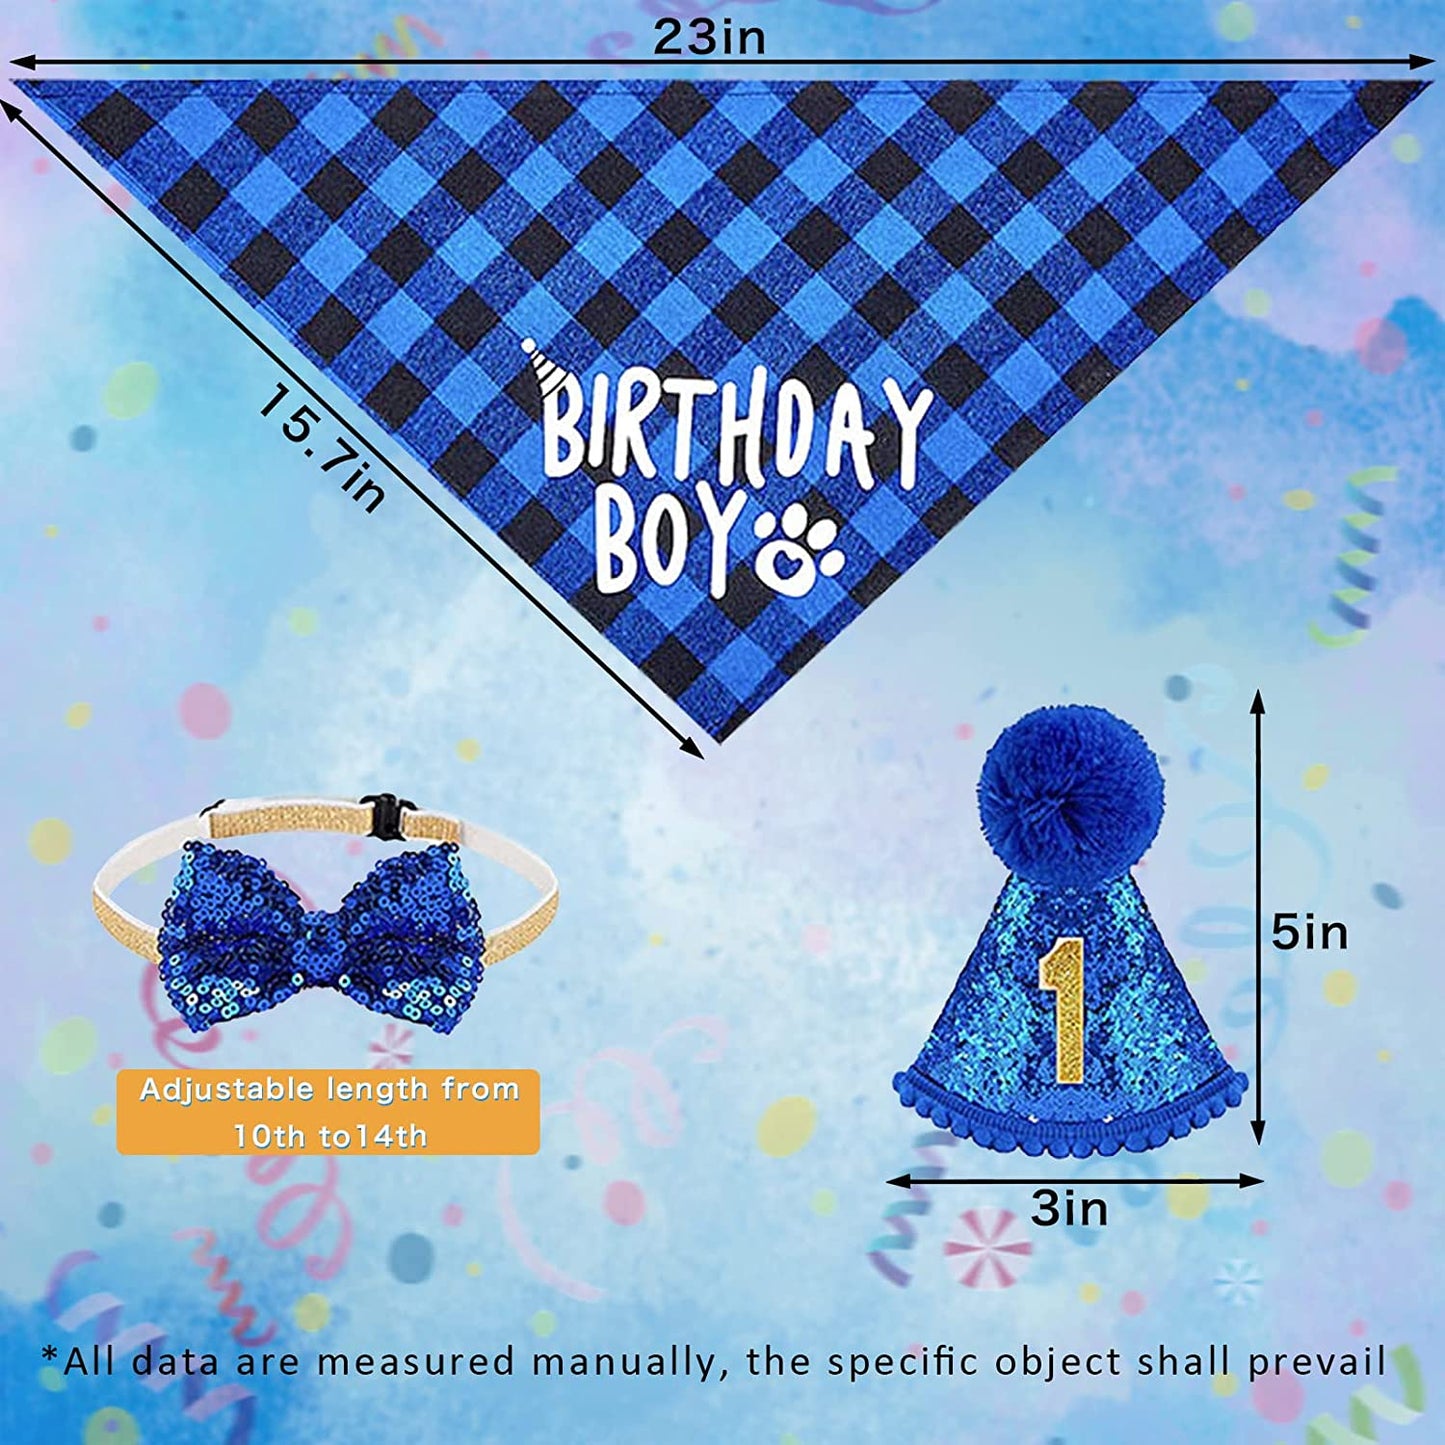 Dog Birthday Party Supplies, Dog Birthday Party Decoration Set, Dog Cute Hat Triangle Scarf Bow Dog Head Banner and Cute Balloon, Used for Dog Birthday Party Decoration (Blue)